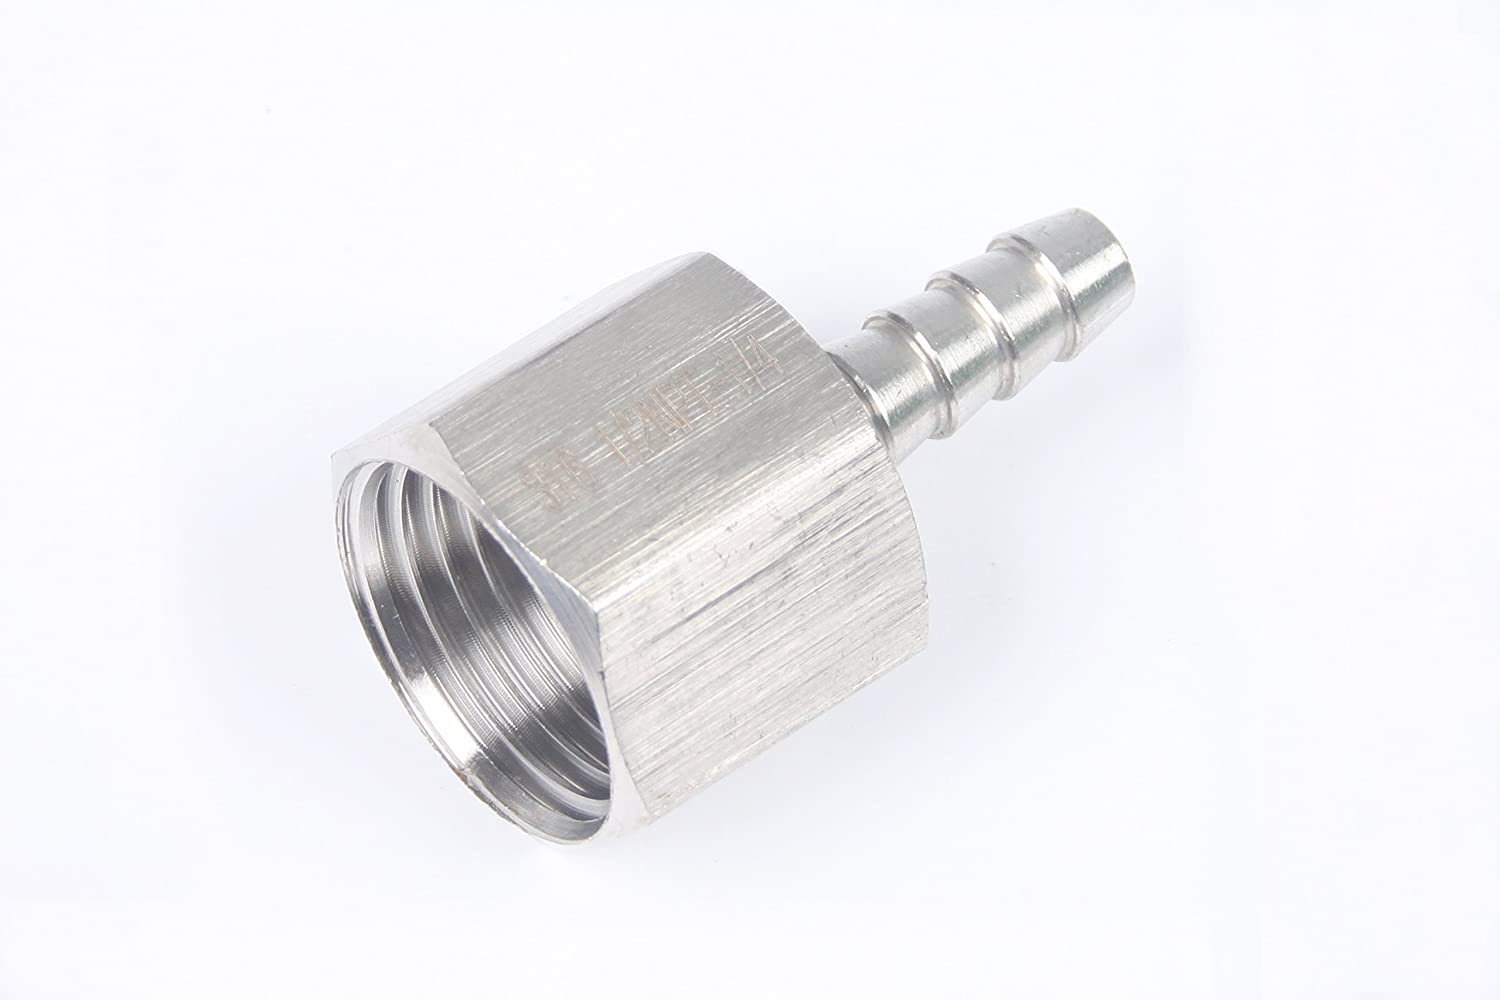 LTWFITTING Bar Production Stainless Steel 316 Barb Fitting Coupler 1/4 Inch Hose ID x 1/2 Inch Female NPT Air Fuel Water (Pack of 400)